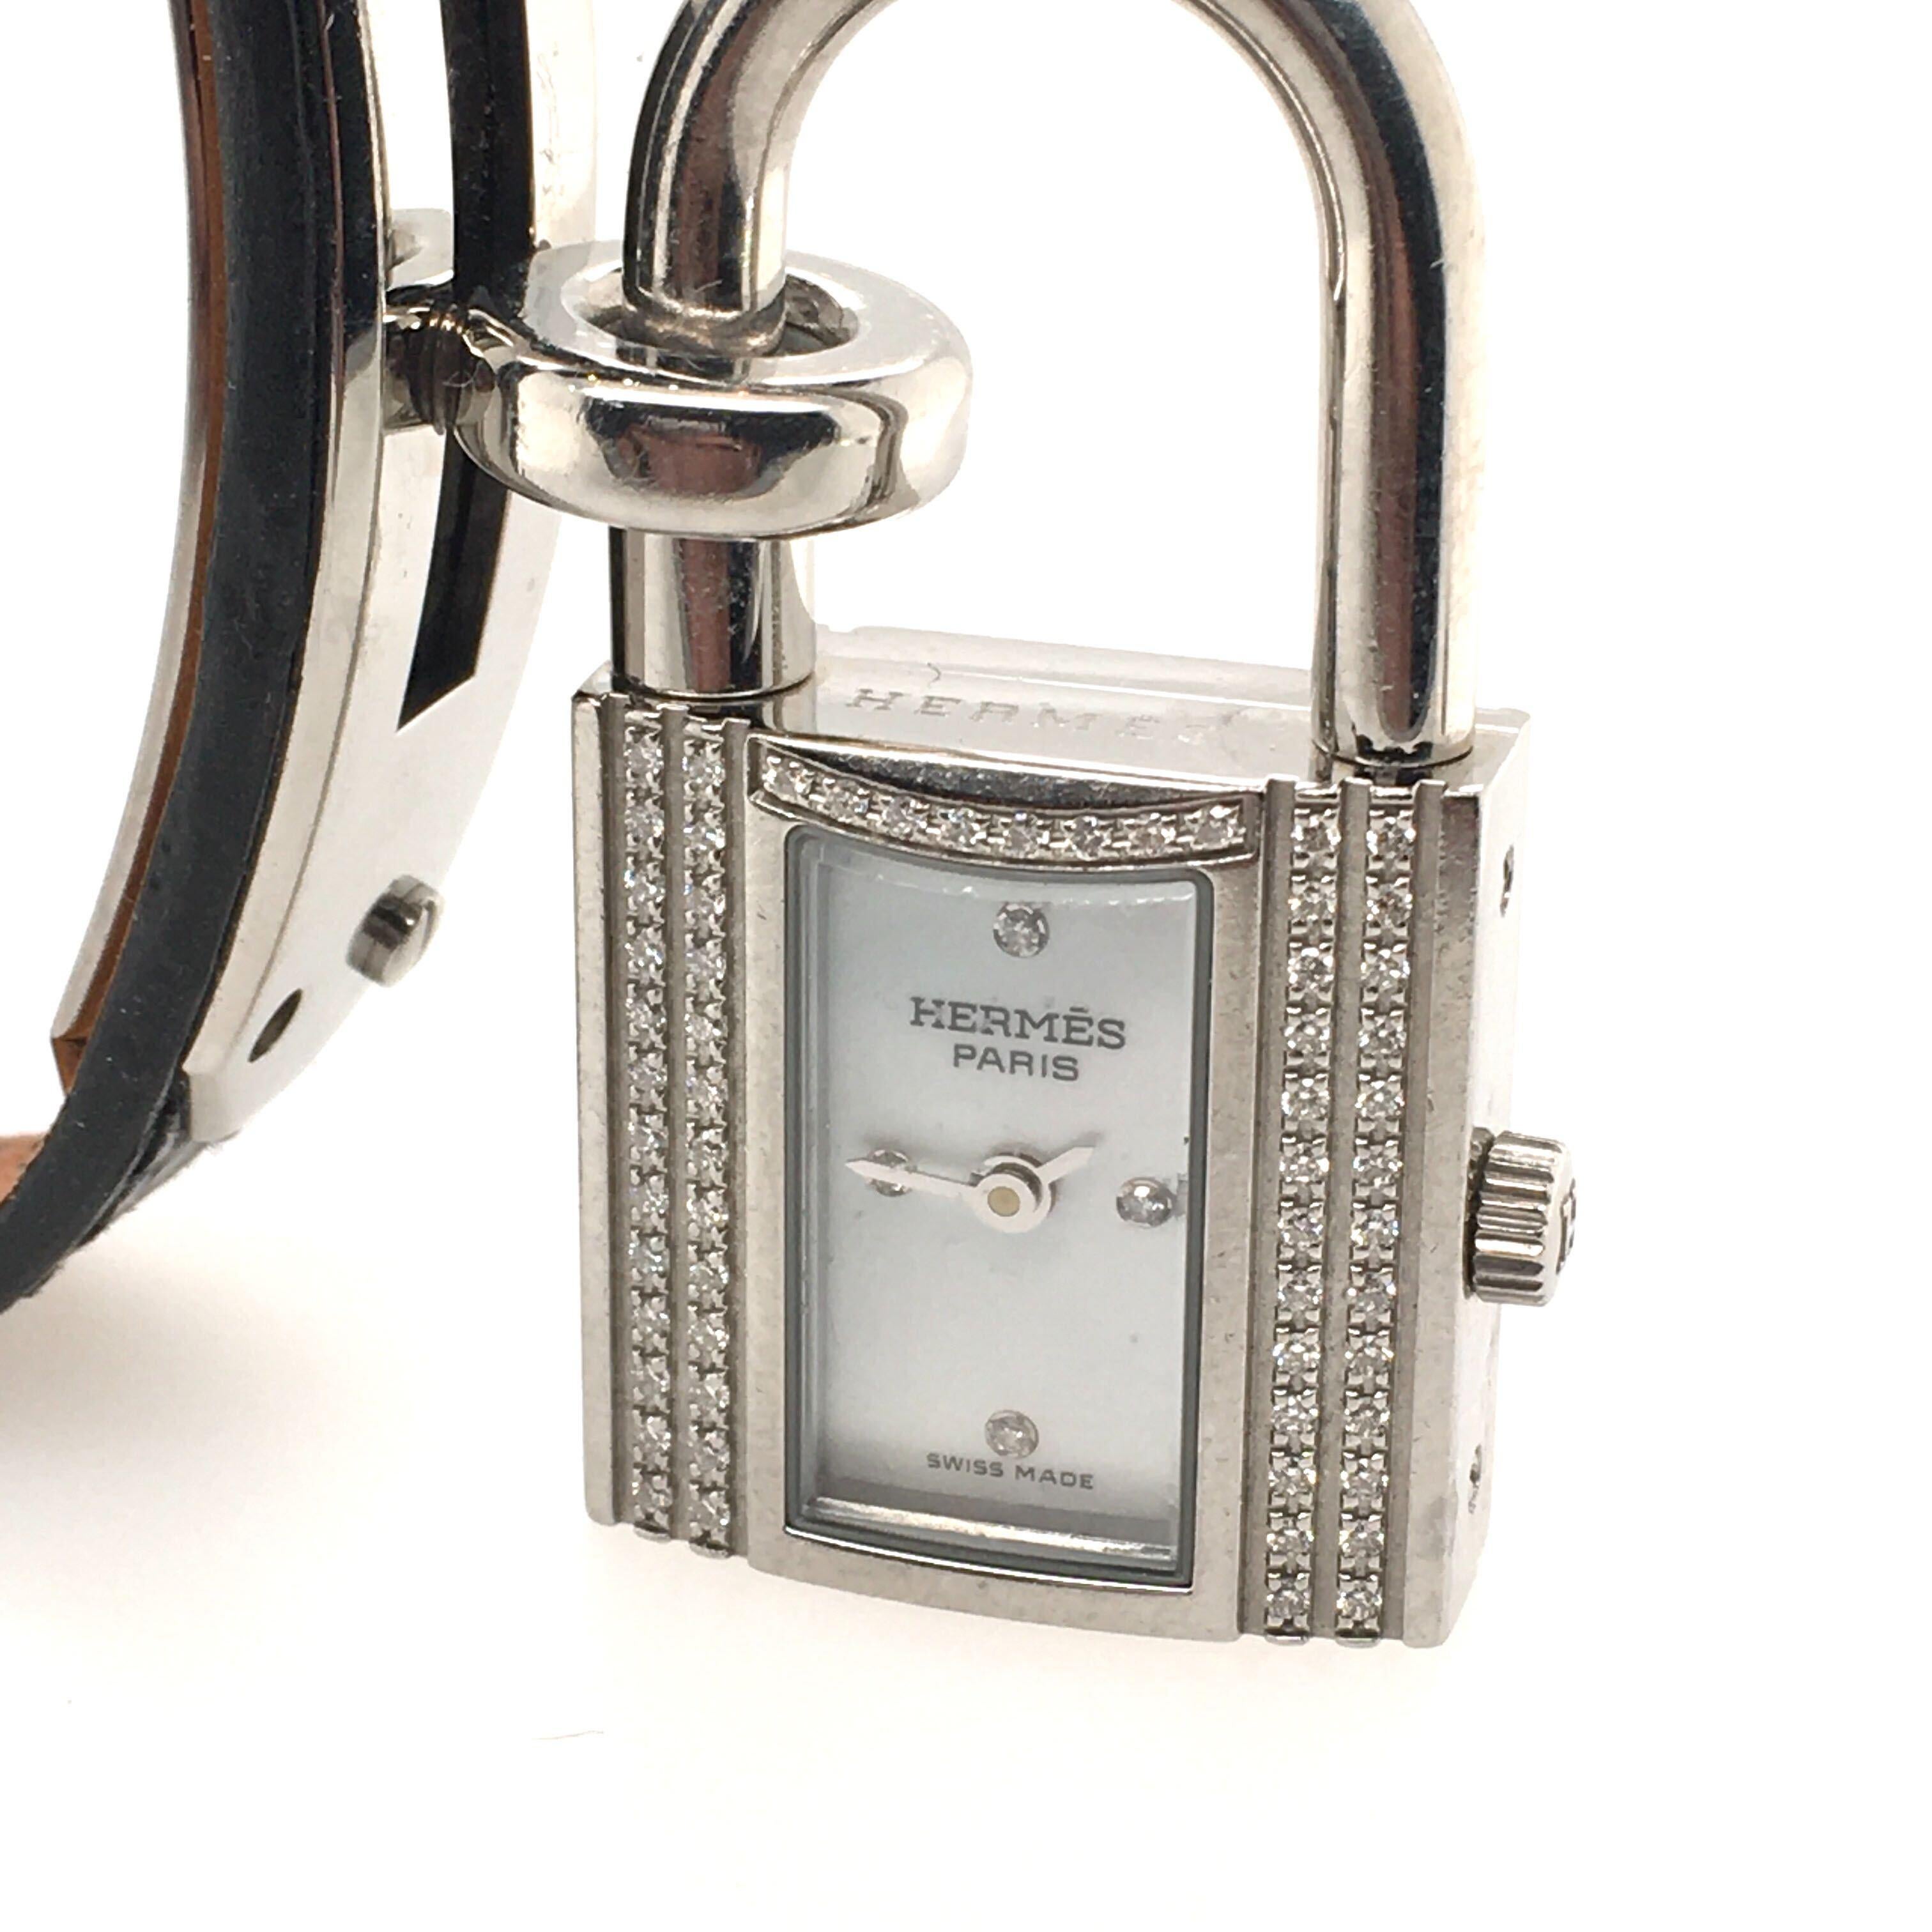 A stainless steel, diamond Kelly Watch. Hermes. Of quartz movement, 20mm. The lock is set with a watch, the white dial with single cut diamond indicators at 12, 3, 6 and 9 o’clock, the case enhanced with pave set diamonds, joined by noir